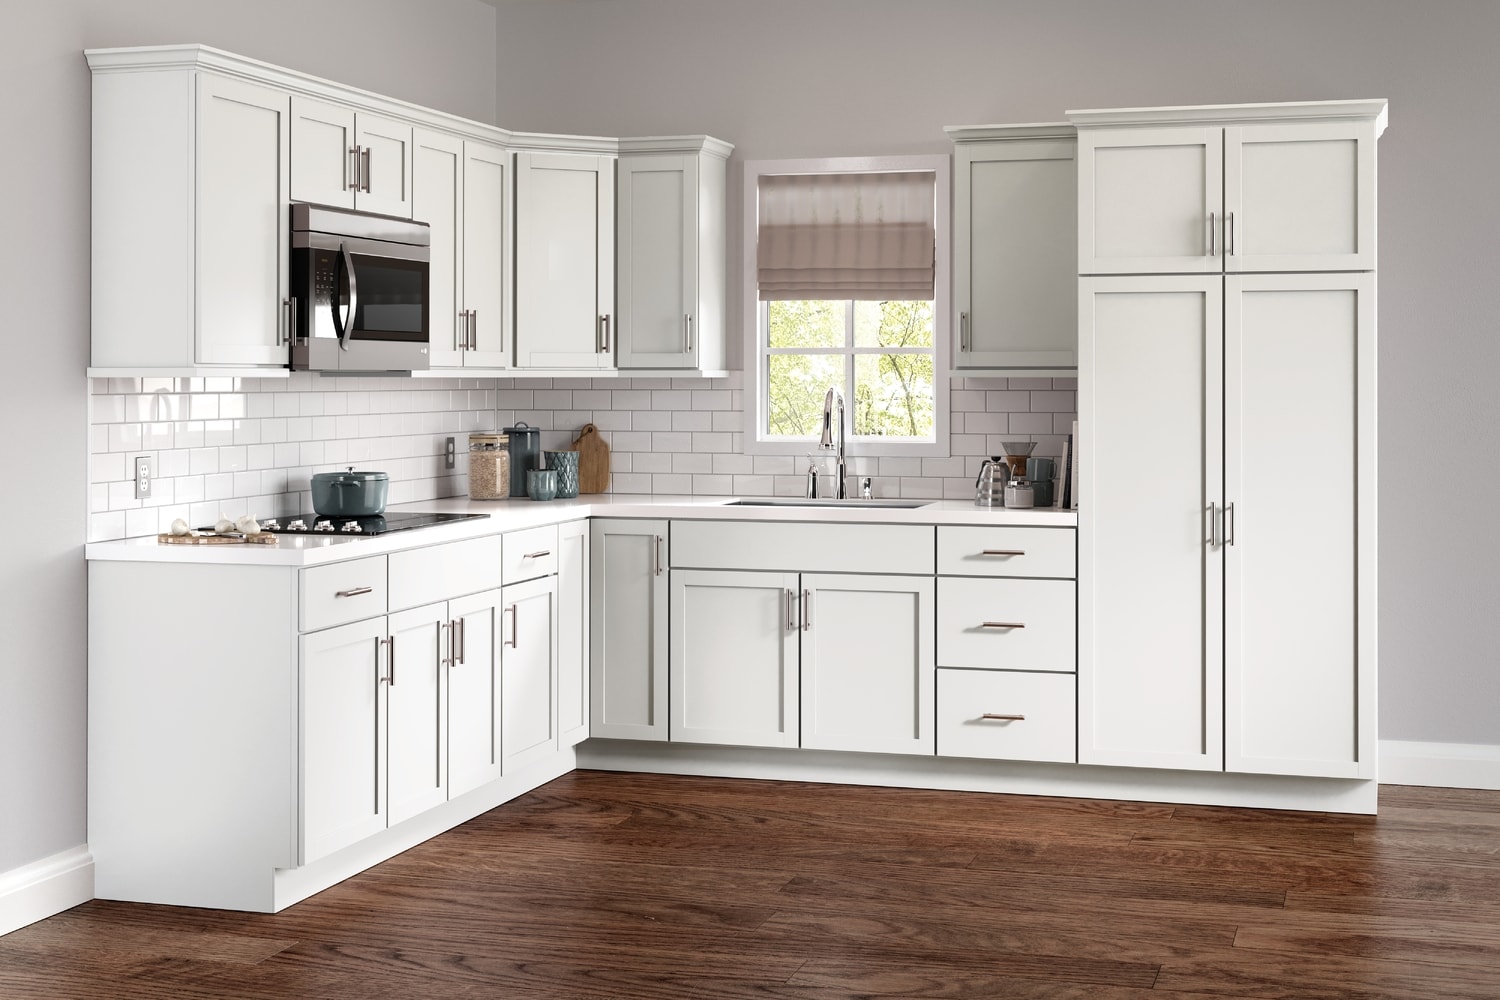 Project Source 30 In W X 34 5 H 24 D White Door And Drawer Base Fully Assembled Cabinet Recessed Panel Shaker Style The Kitchen Cabinets Department At Lowes Com